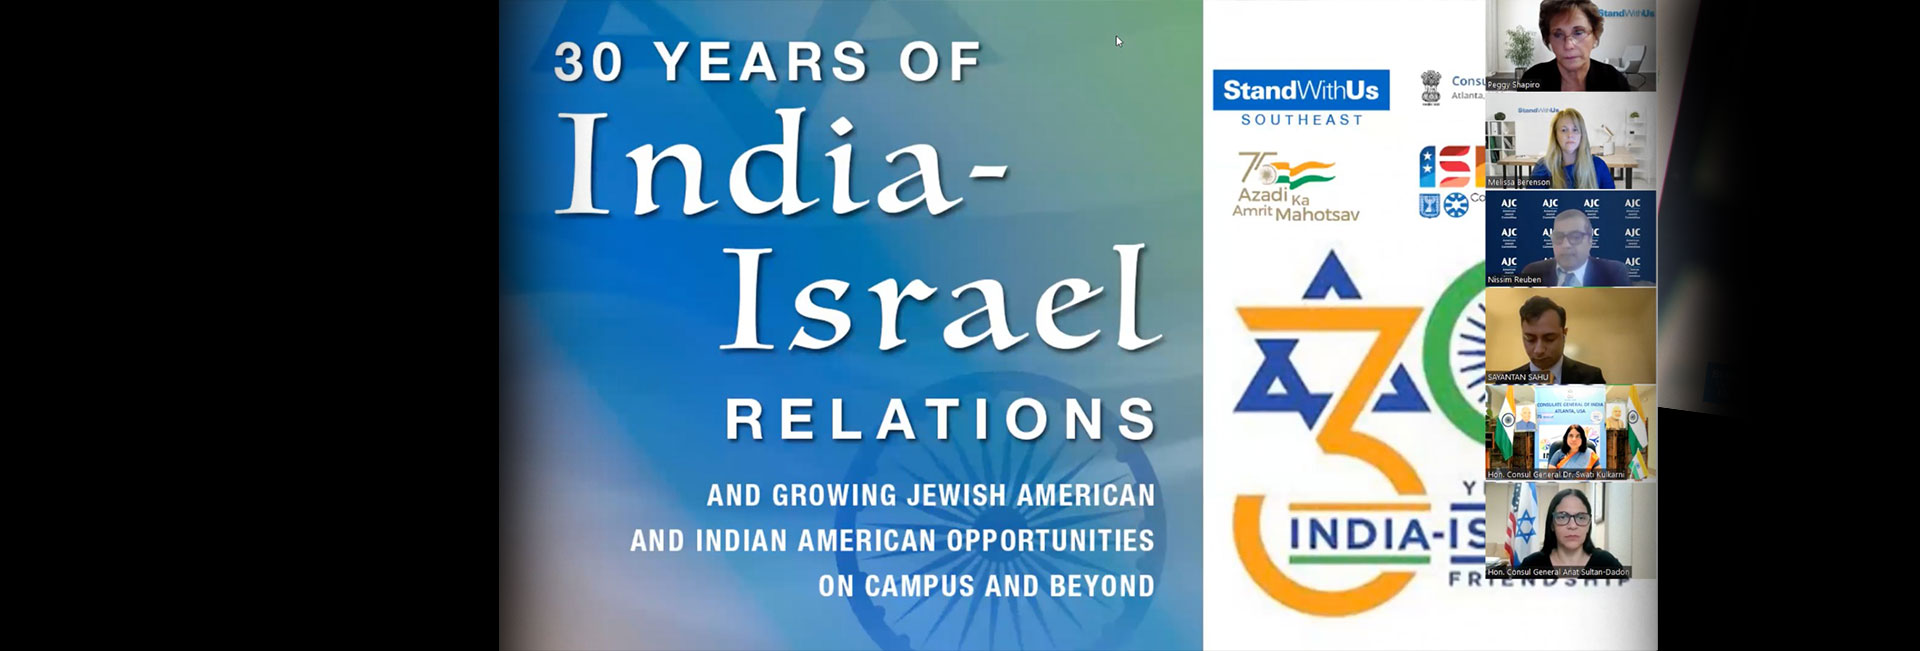 30 Years India-Israel Relations